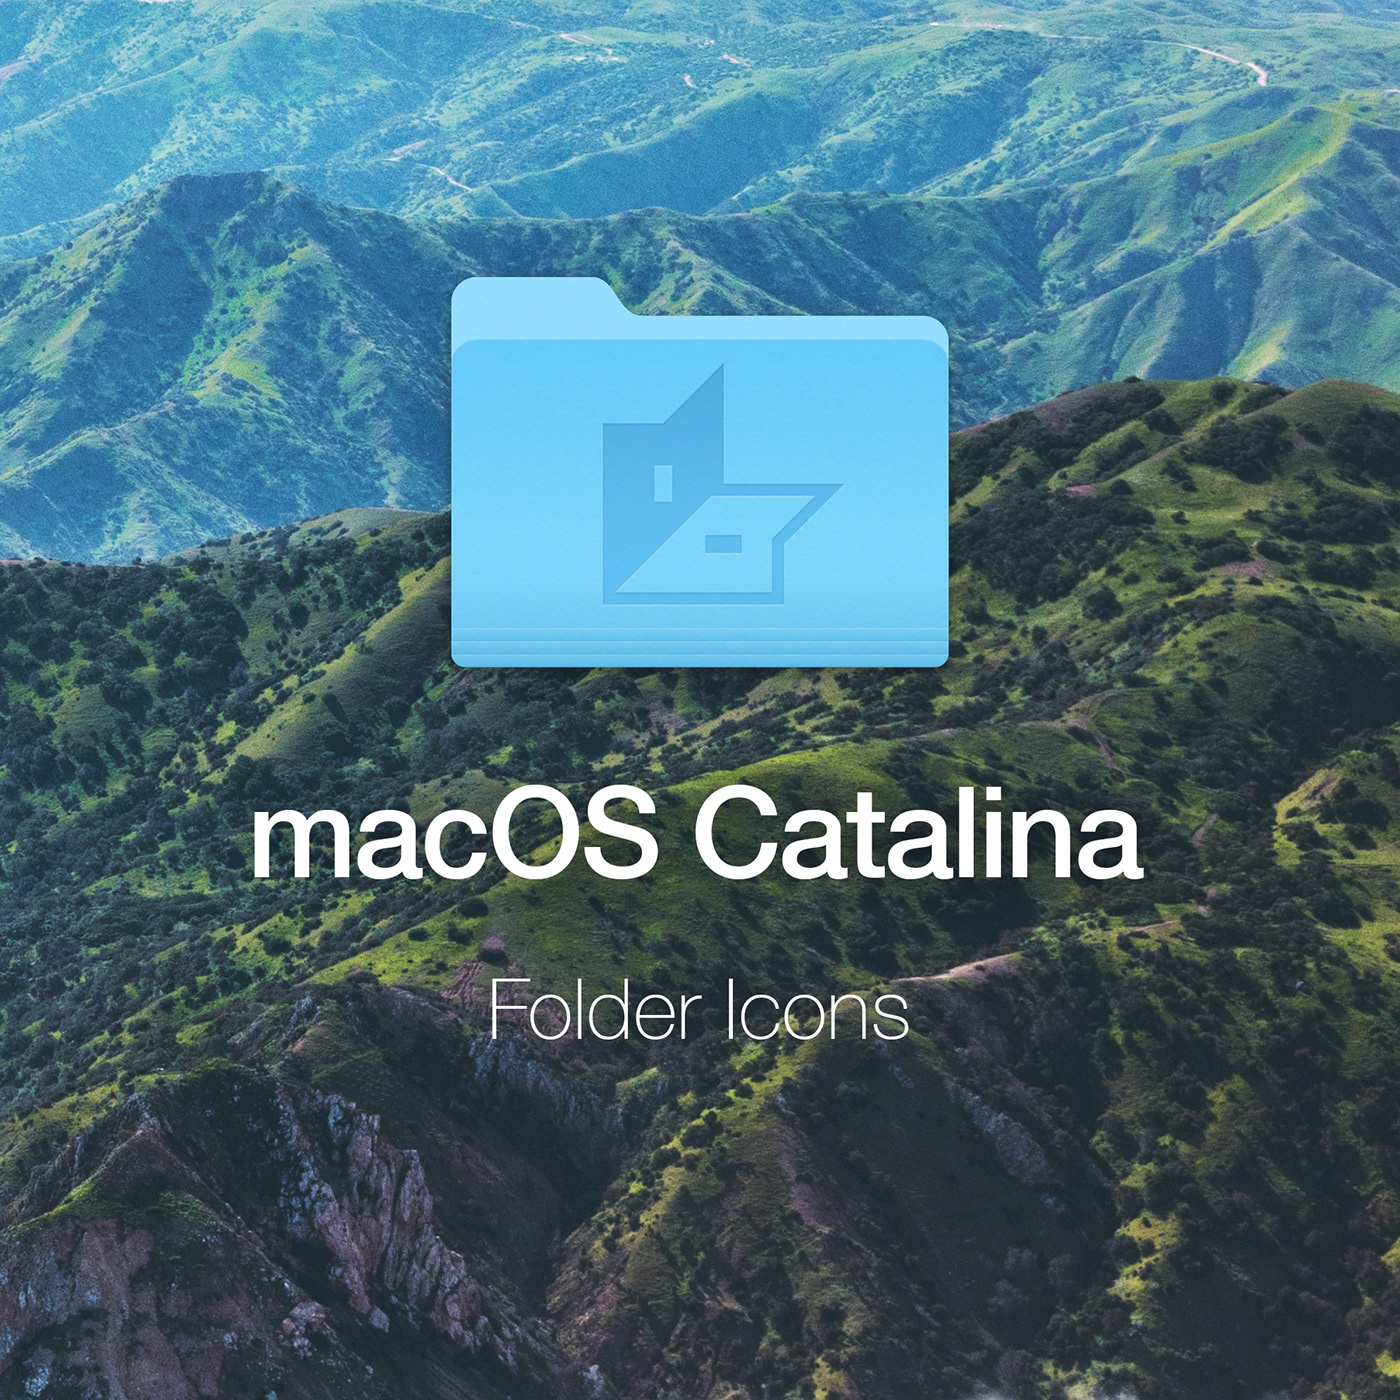 icons Folders macos catalina Folder Icons free download